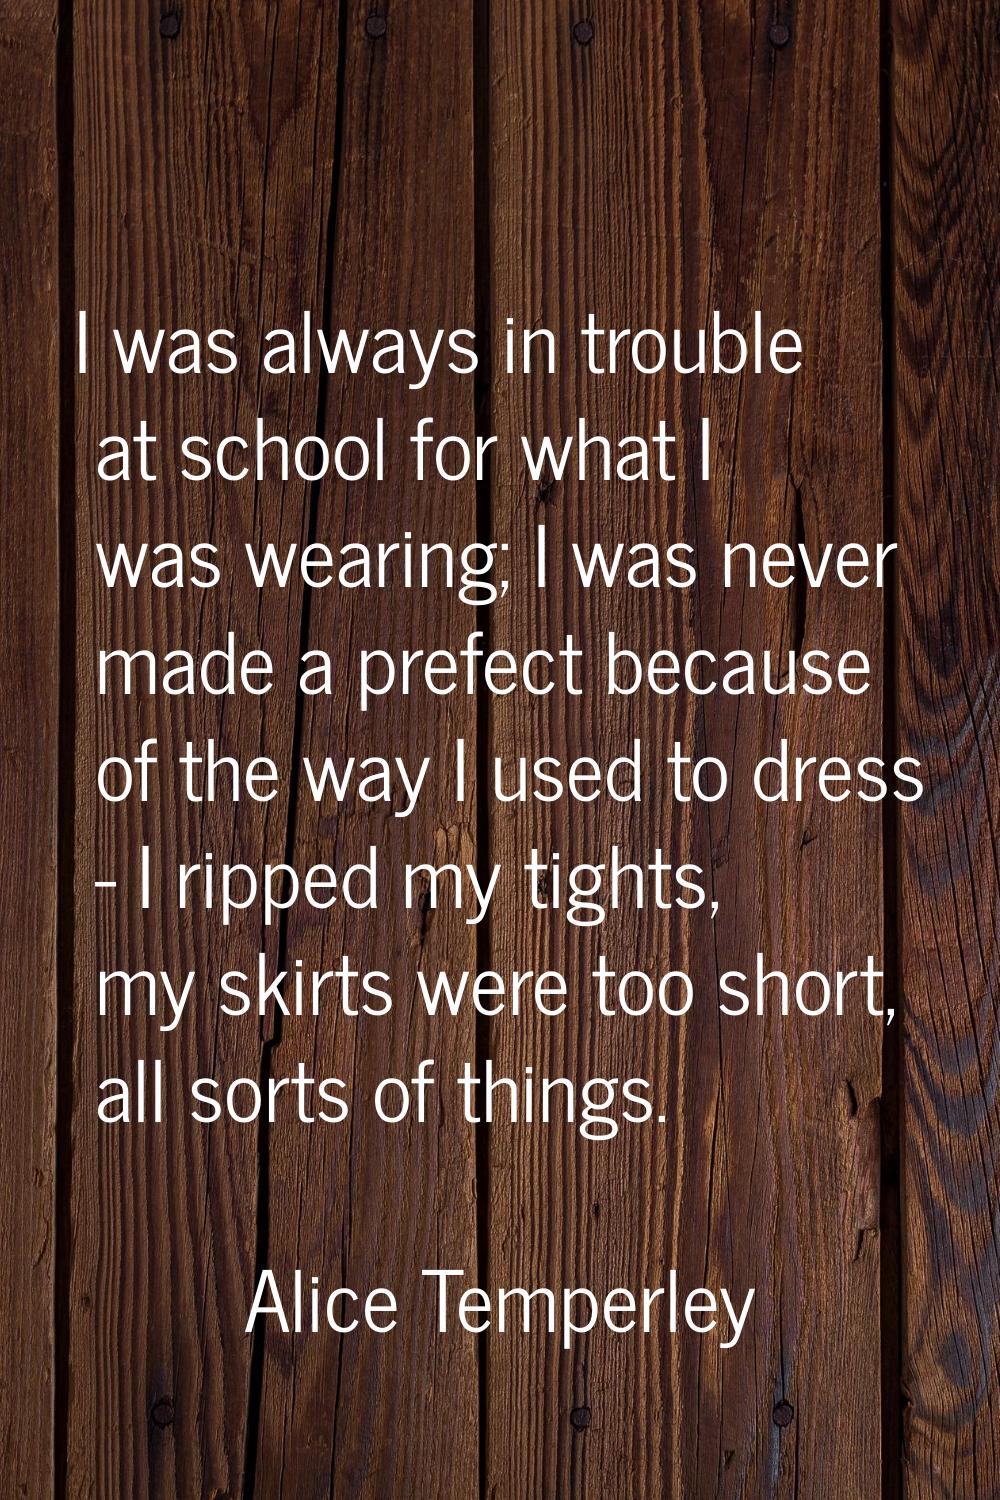 I was always in trouble at school for what I was wearing; I was never made a prefect because of the